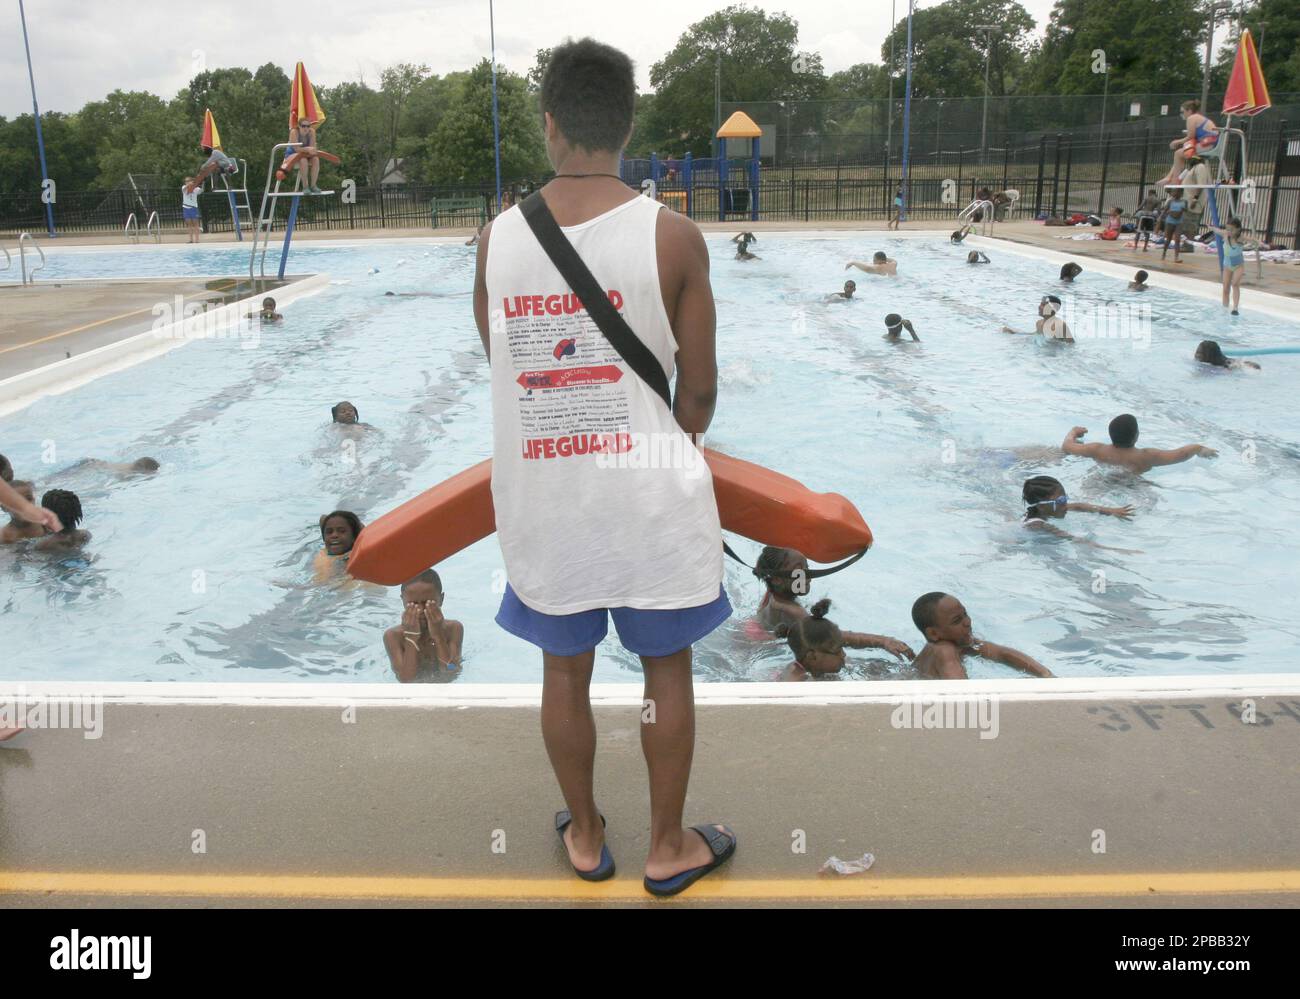 https://c8.alamy.com/comp/2PBB32Y/advance-for-sunday-july-15-lifeguard-illyas-hodrick-watches-over-swimmers-at-pleasant-ridge-pool-tuesday-june-19-2007-in-cincinnati-the-need-for-lifeguards-has-grown-consistently-over-the-last-25-years-fueled-by-the-proliferation-of-water-parks-along-with-municipal-pools-and-private-aquatic-facilities-ap-photodavid-kohl-2PBB32Y.jpg